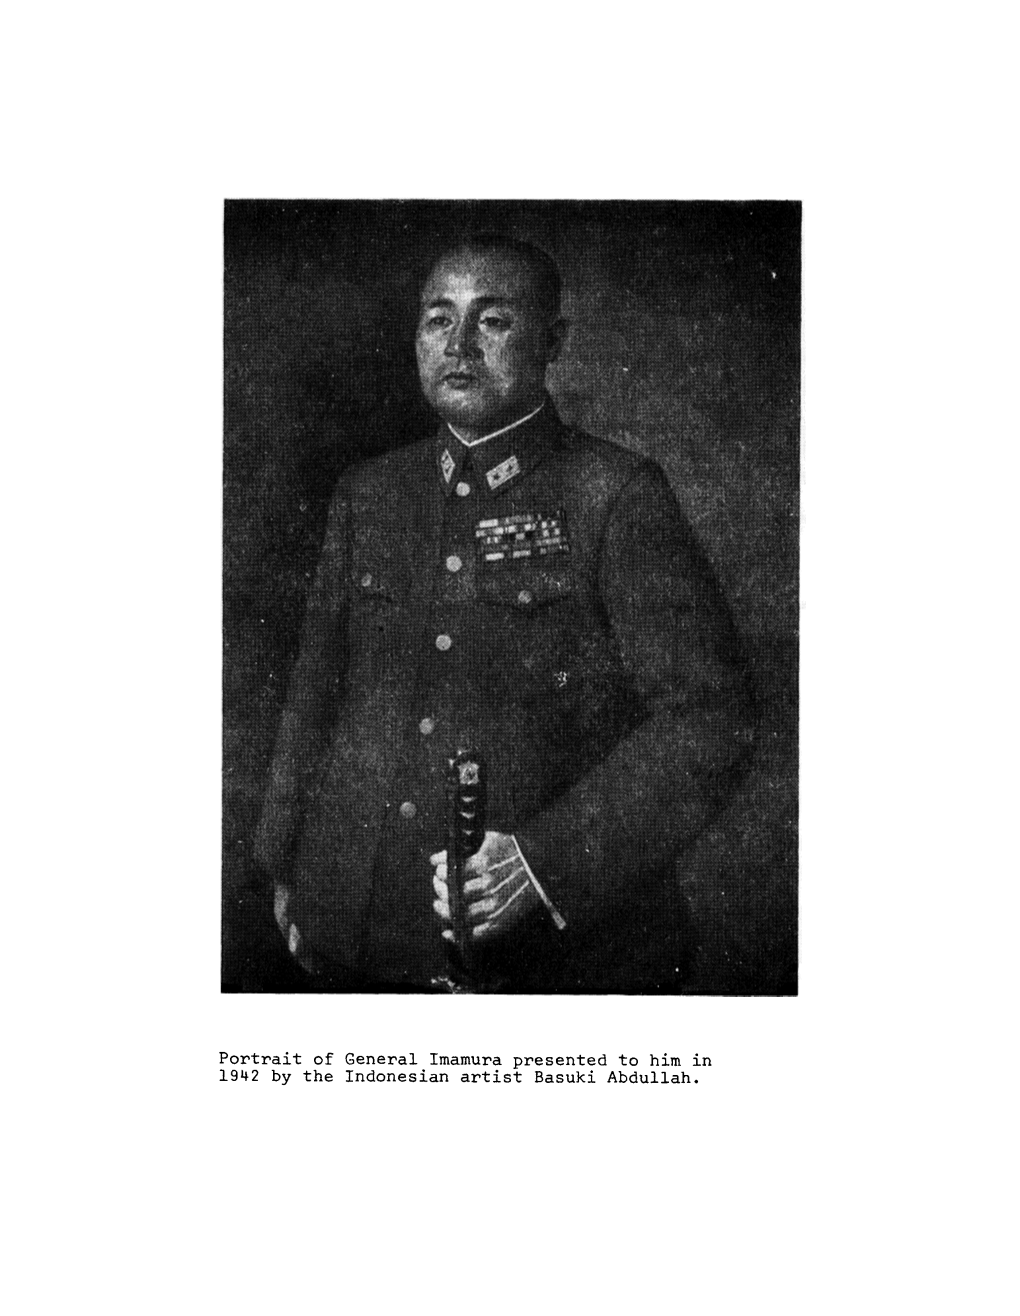 Portrait of General Imamura Presented to Him in 1942 by the Indonesian Artist Basuki Abdullah